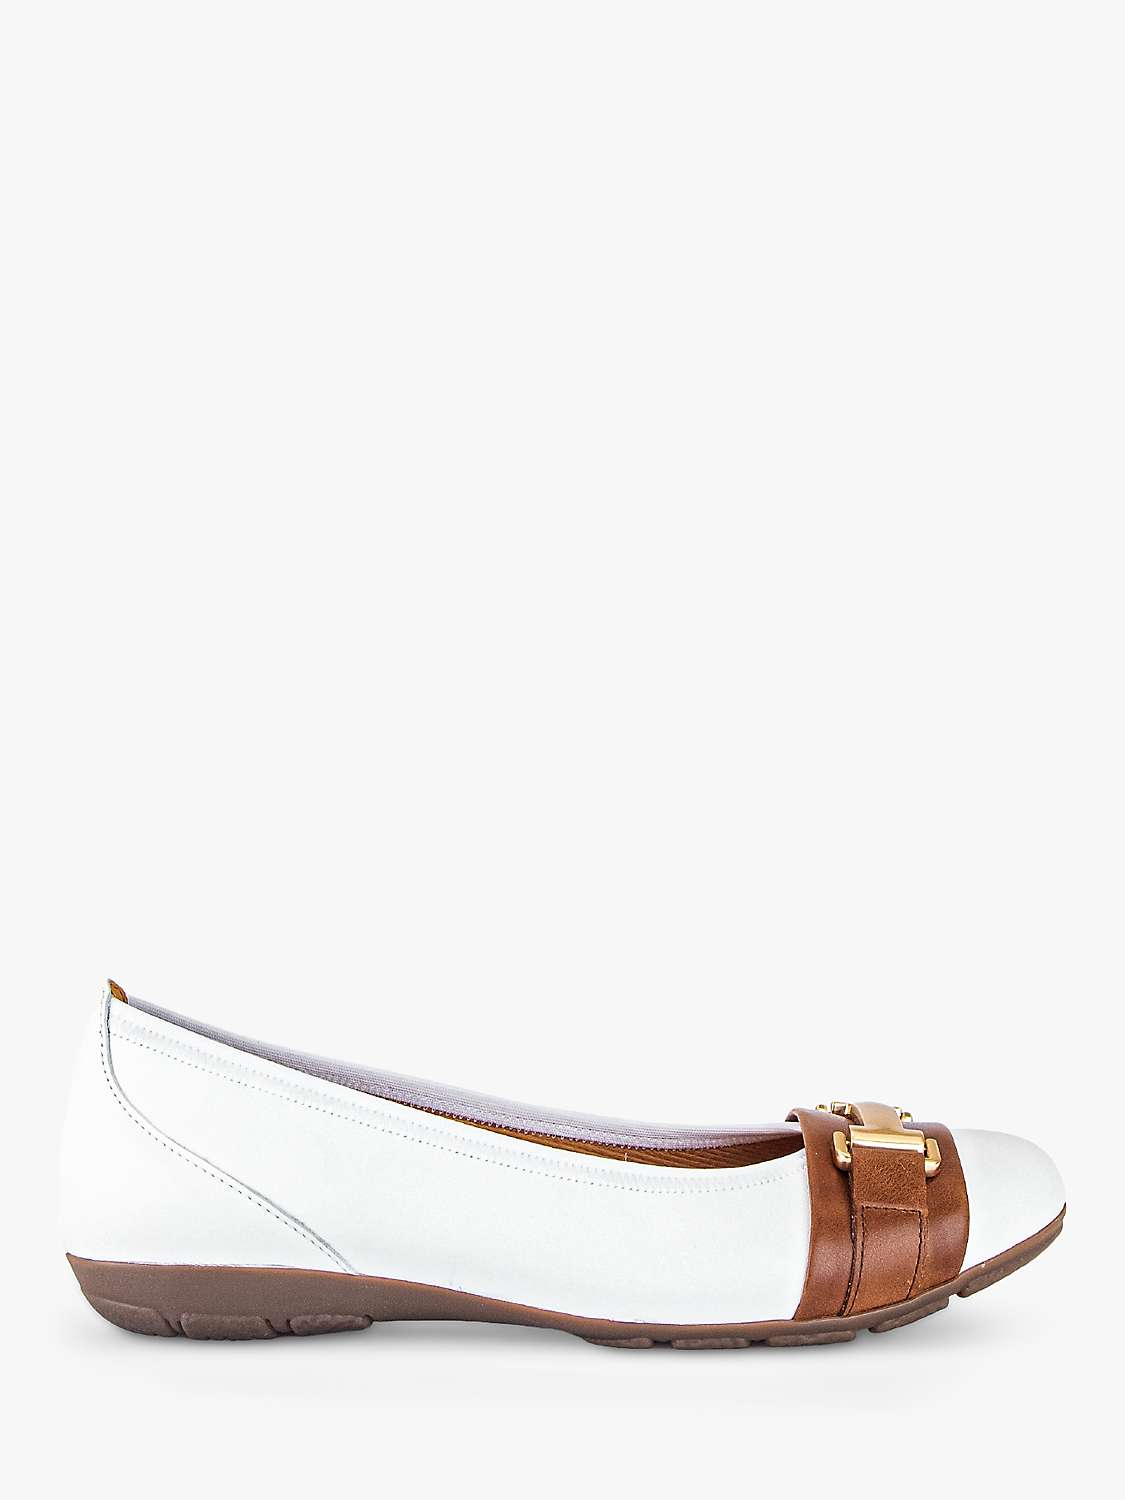 Buy Gabor Rona Leather Chain Detail Ballet Pumps, White/Tan Online at johnlewis.com